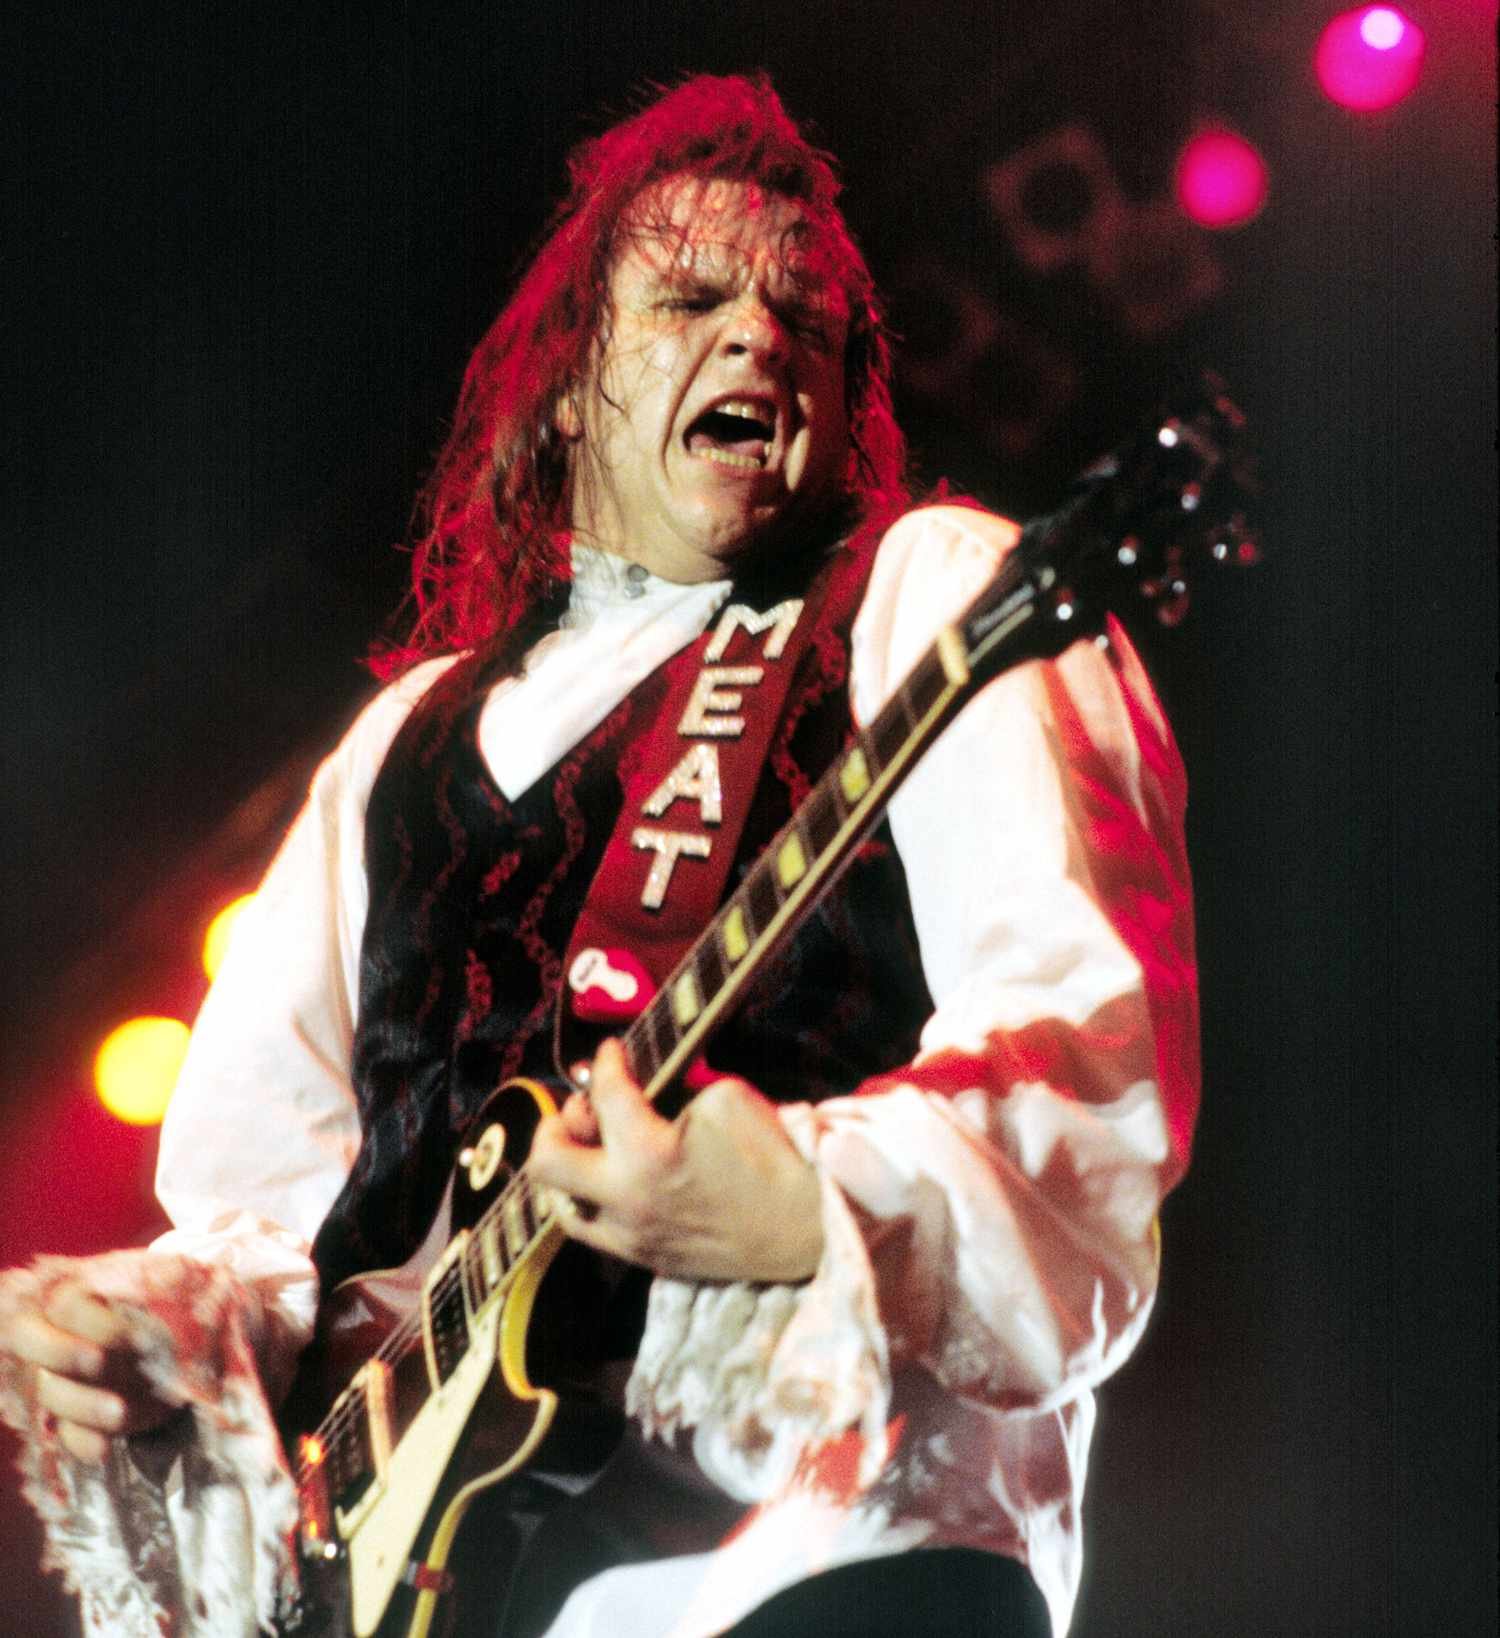 Meat Loaf Told PEOPLE He Was 'Unbelievably Happy' After Overcoming Alcohol Abuse, Enjoying Family in 1993